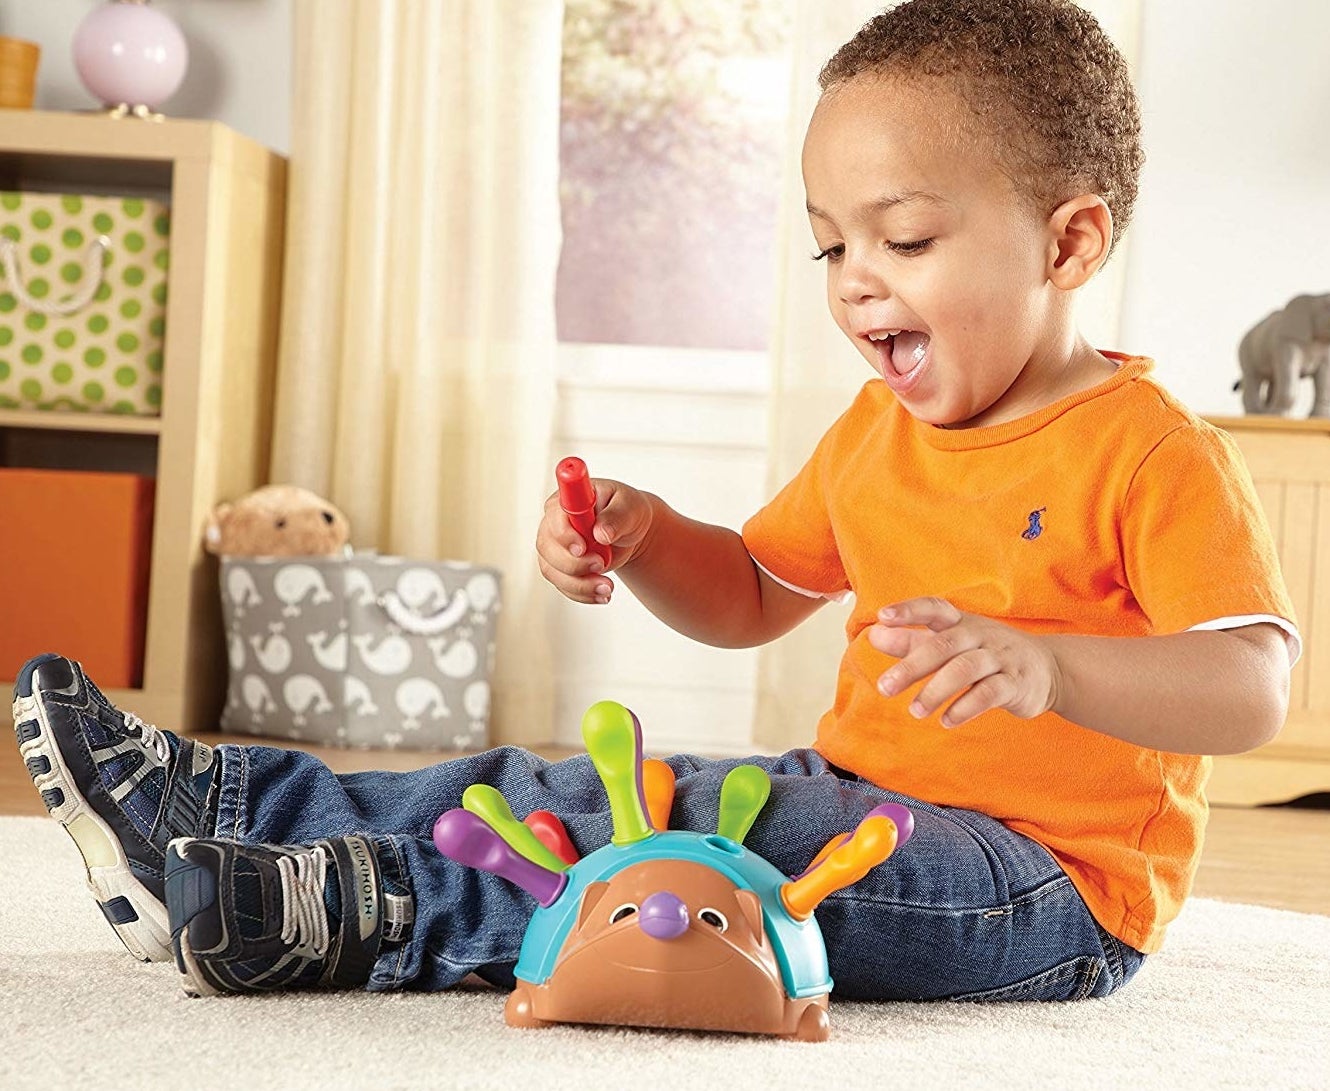 Child model playing with colorful plastic hedgehog toy